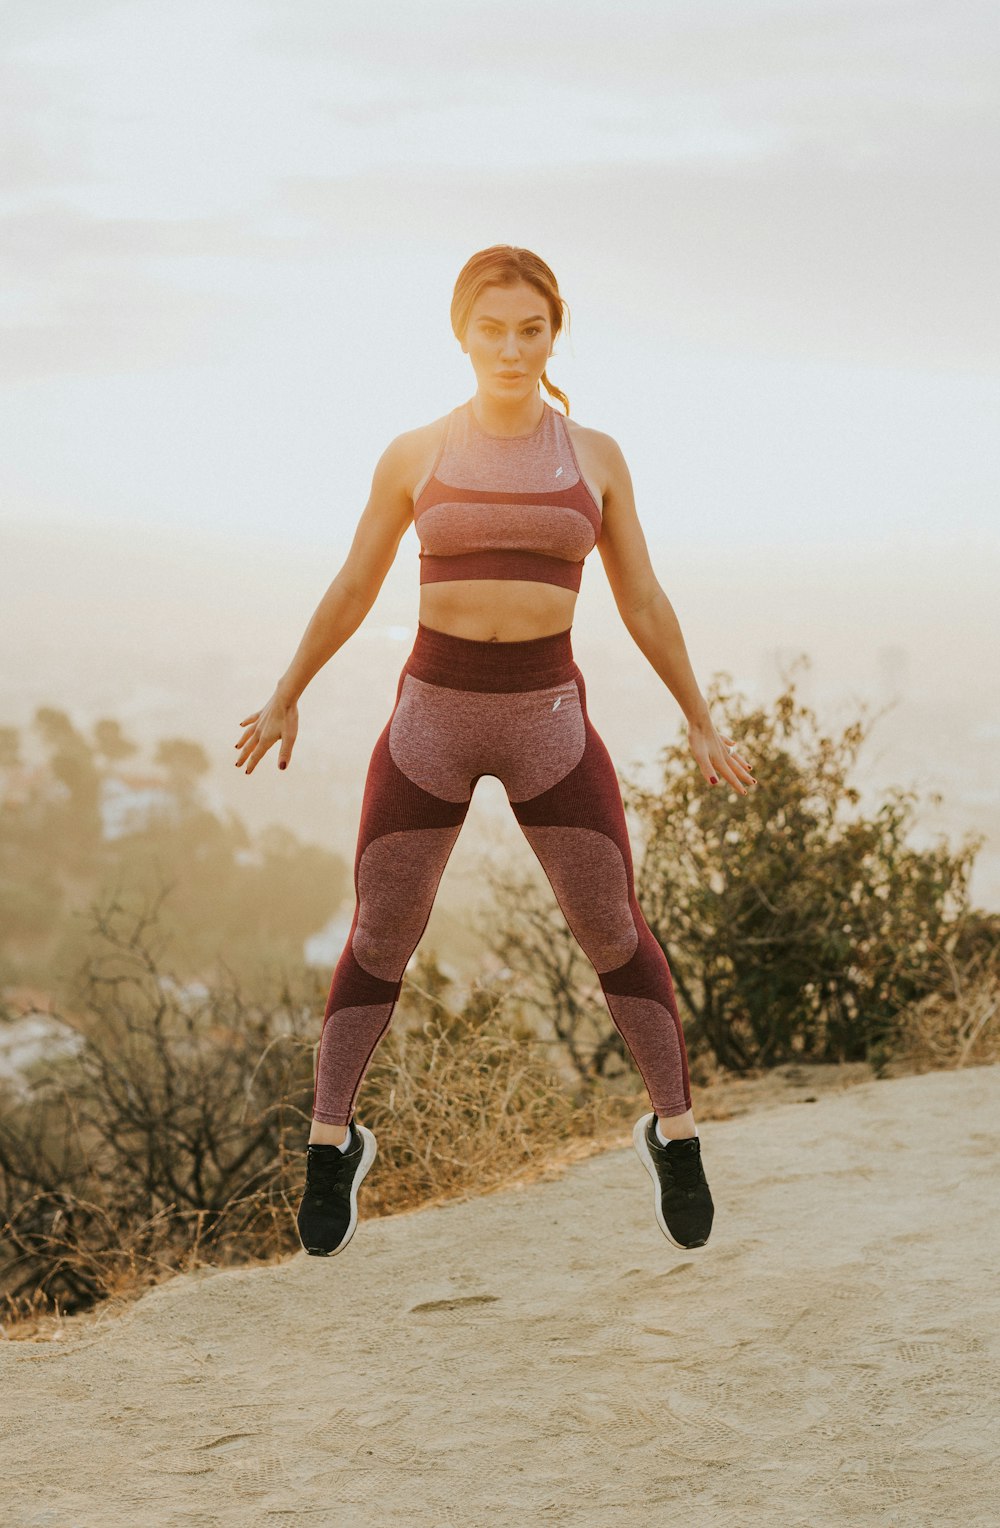 Woman Exercising Pictures  Download Free Images on Unsplash